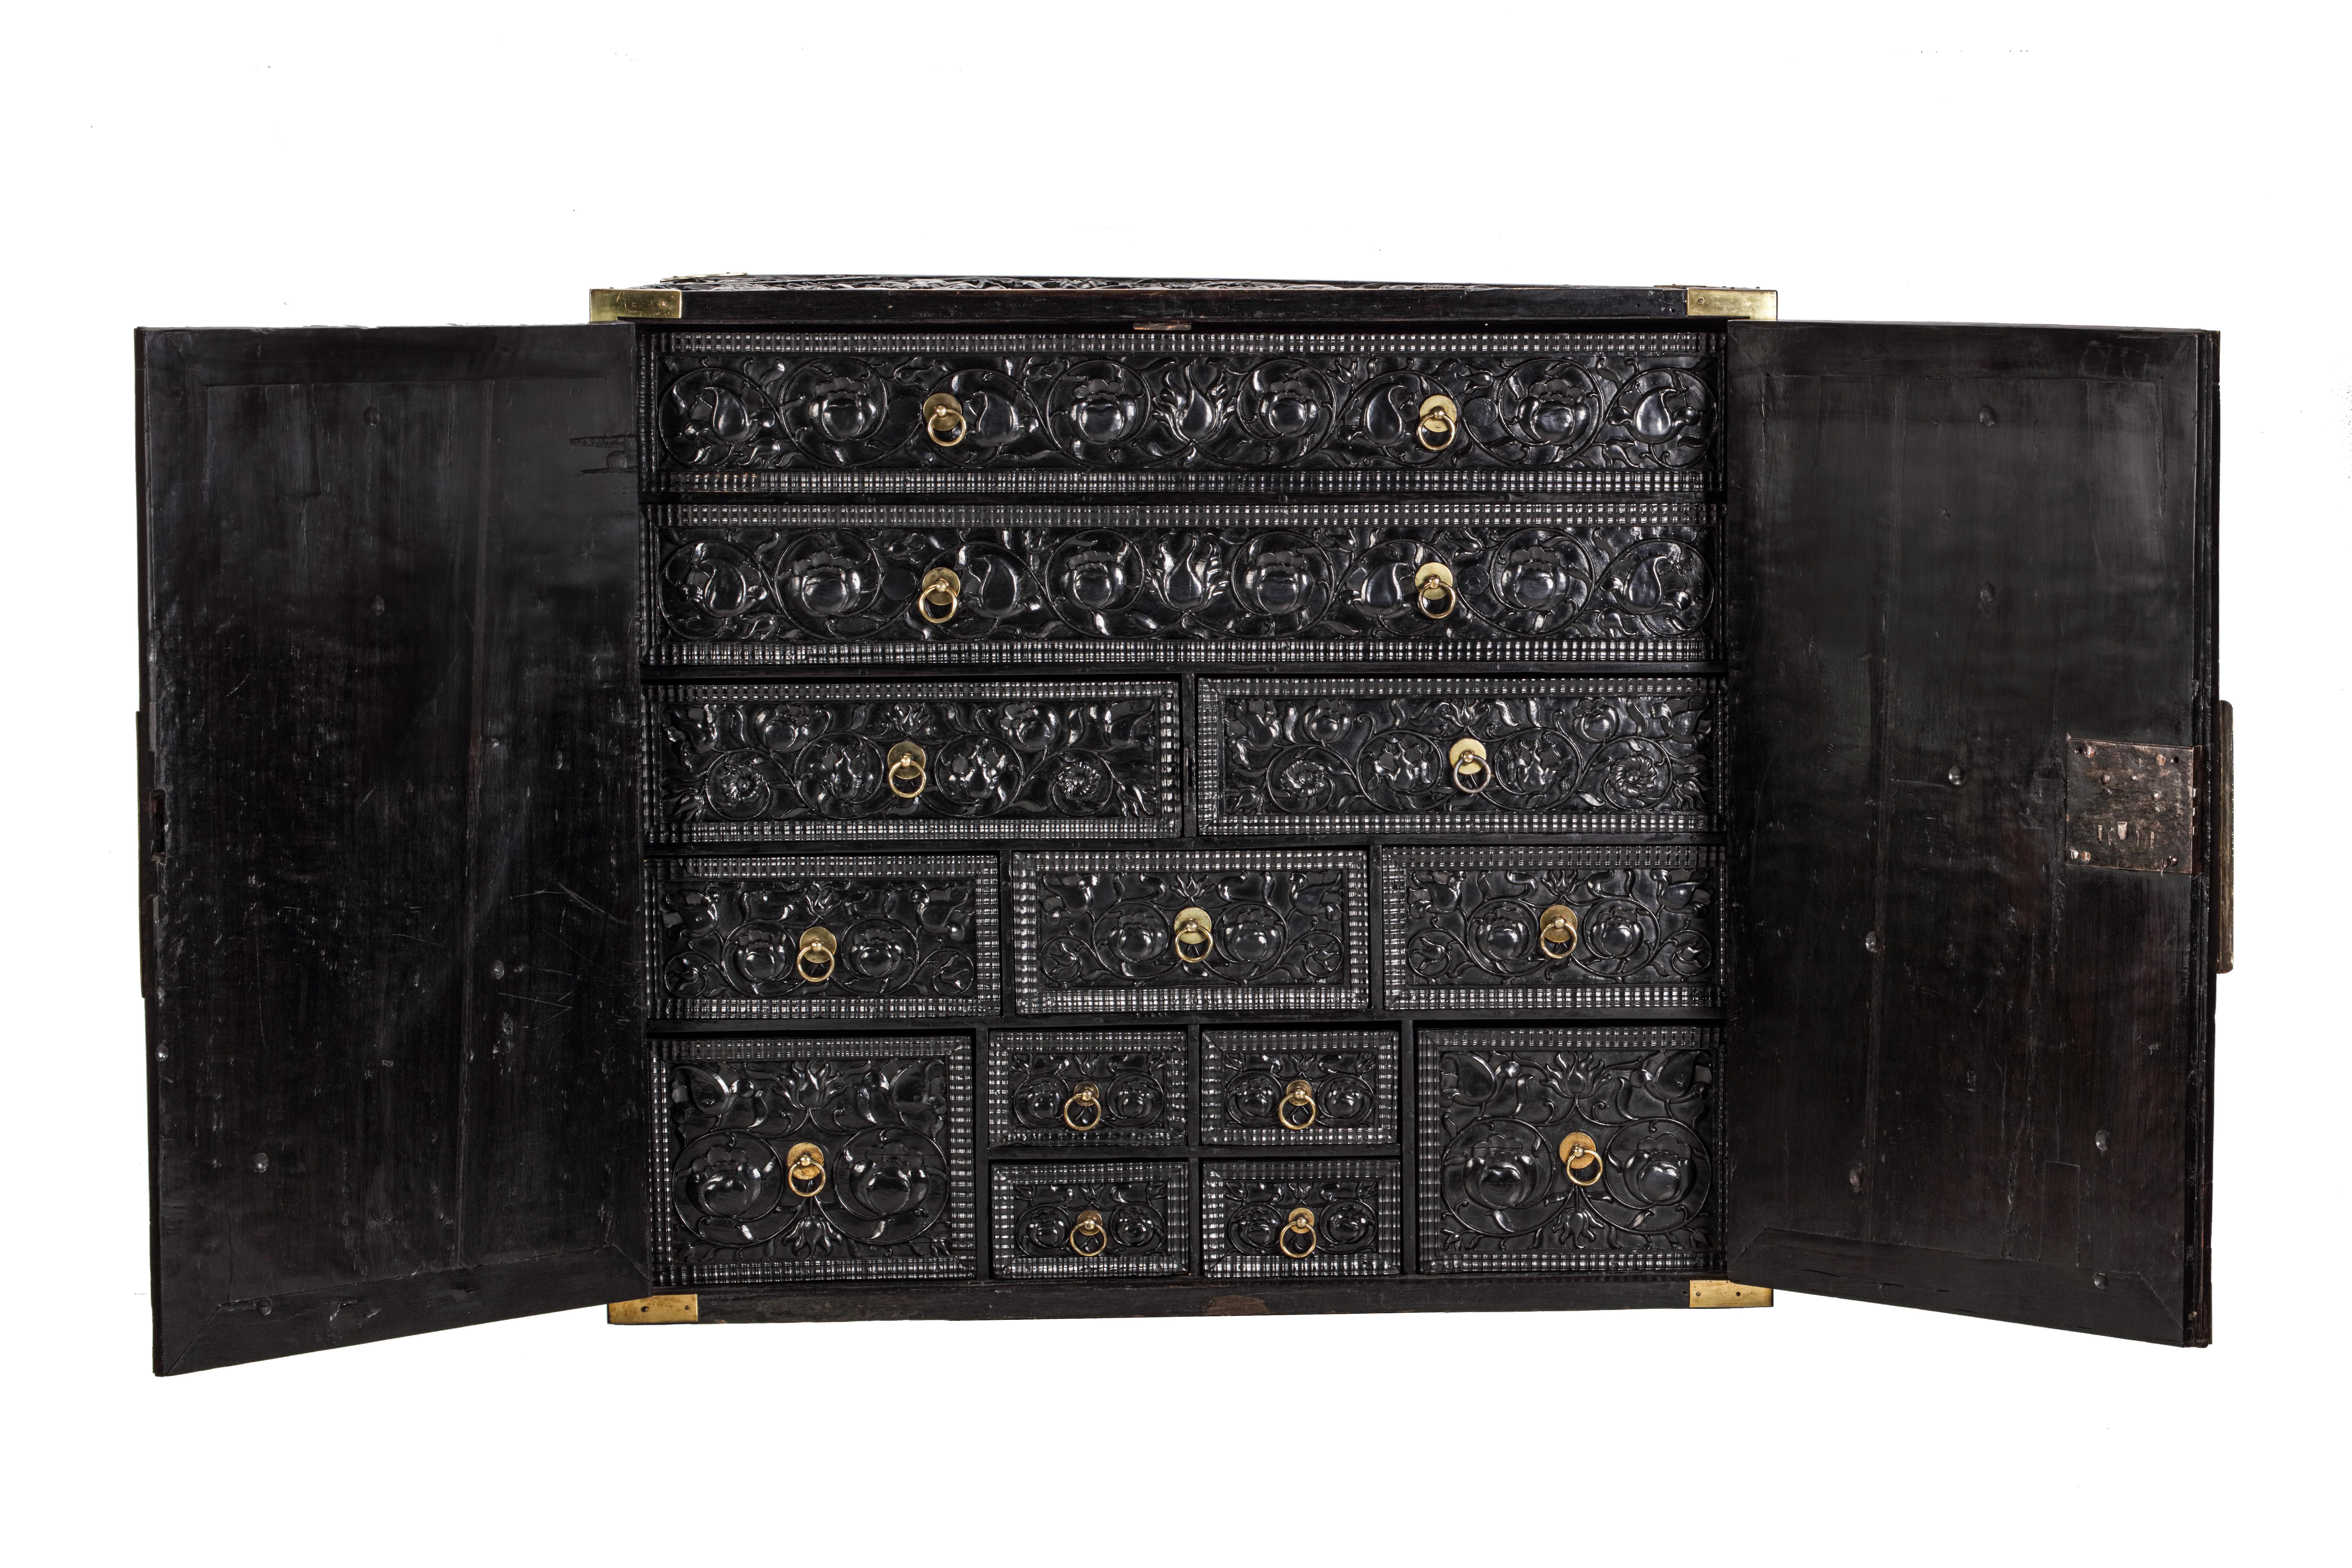 A Dutch colonial ebony cabinet with brass mounts on contemporary black steel frame

Batavia (Jakarta), 2nd half 17th century

The cabinet has two massive ebony doors opening to reveal thirteen various-sized drawers. The outside of the cabinet and